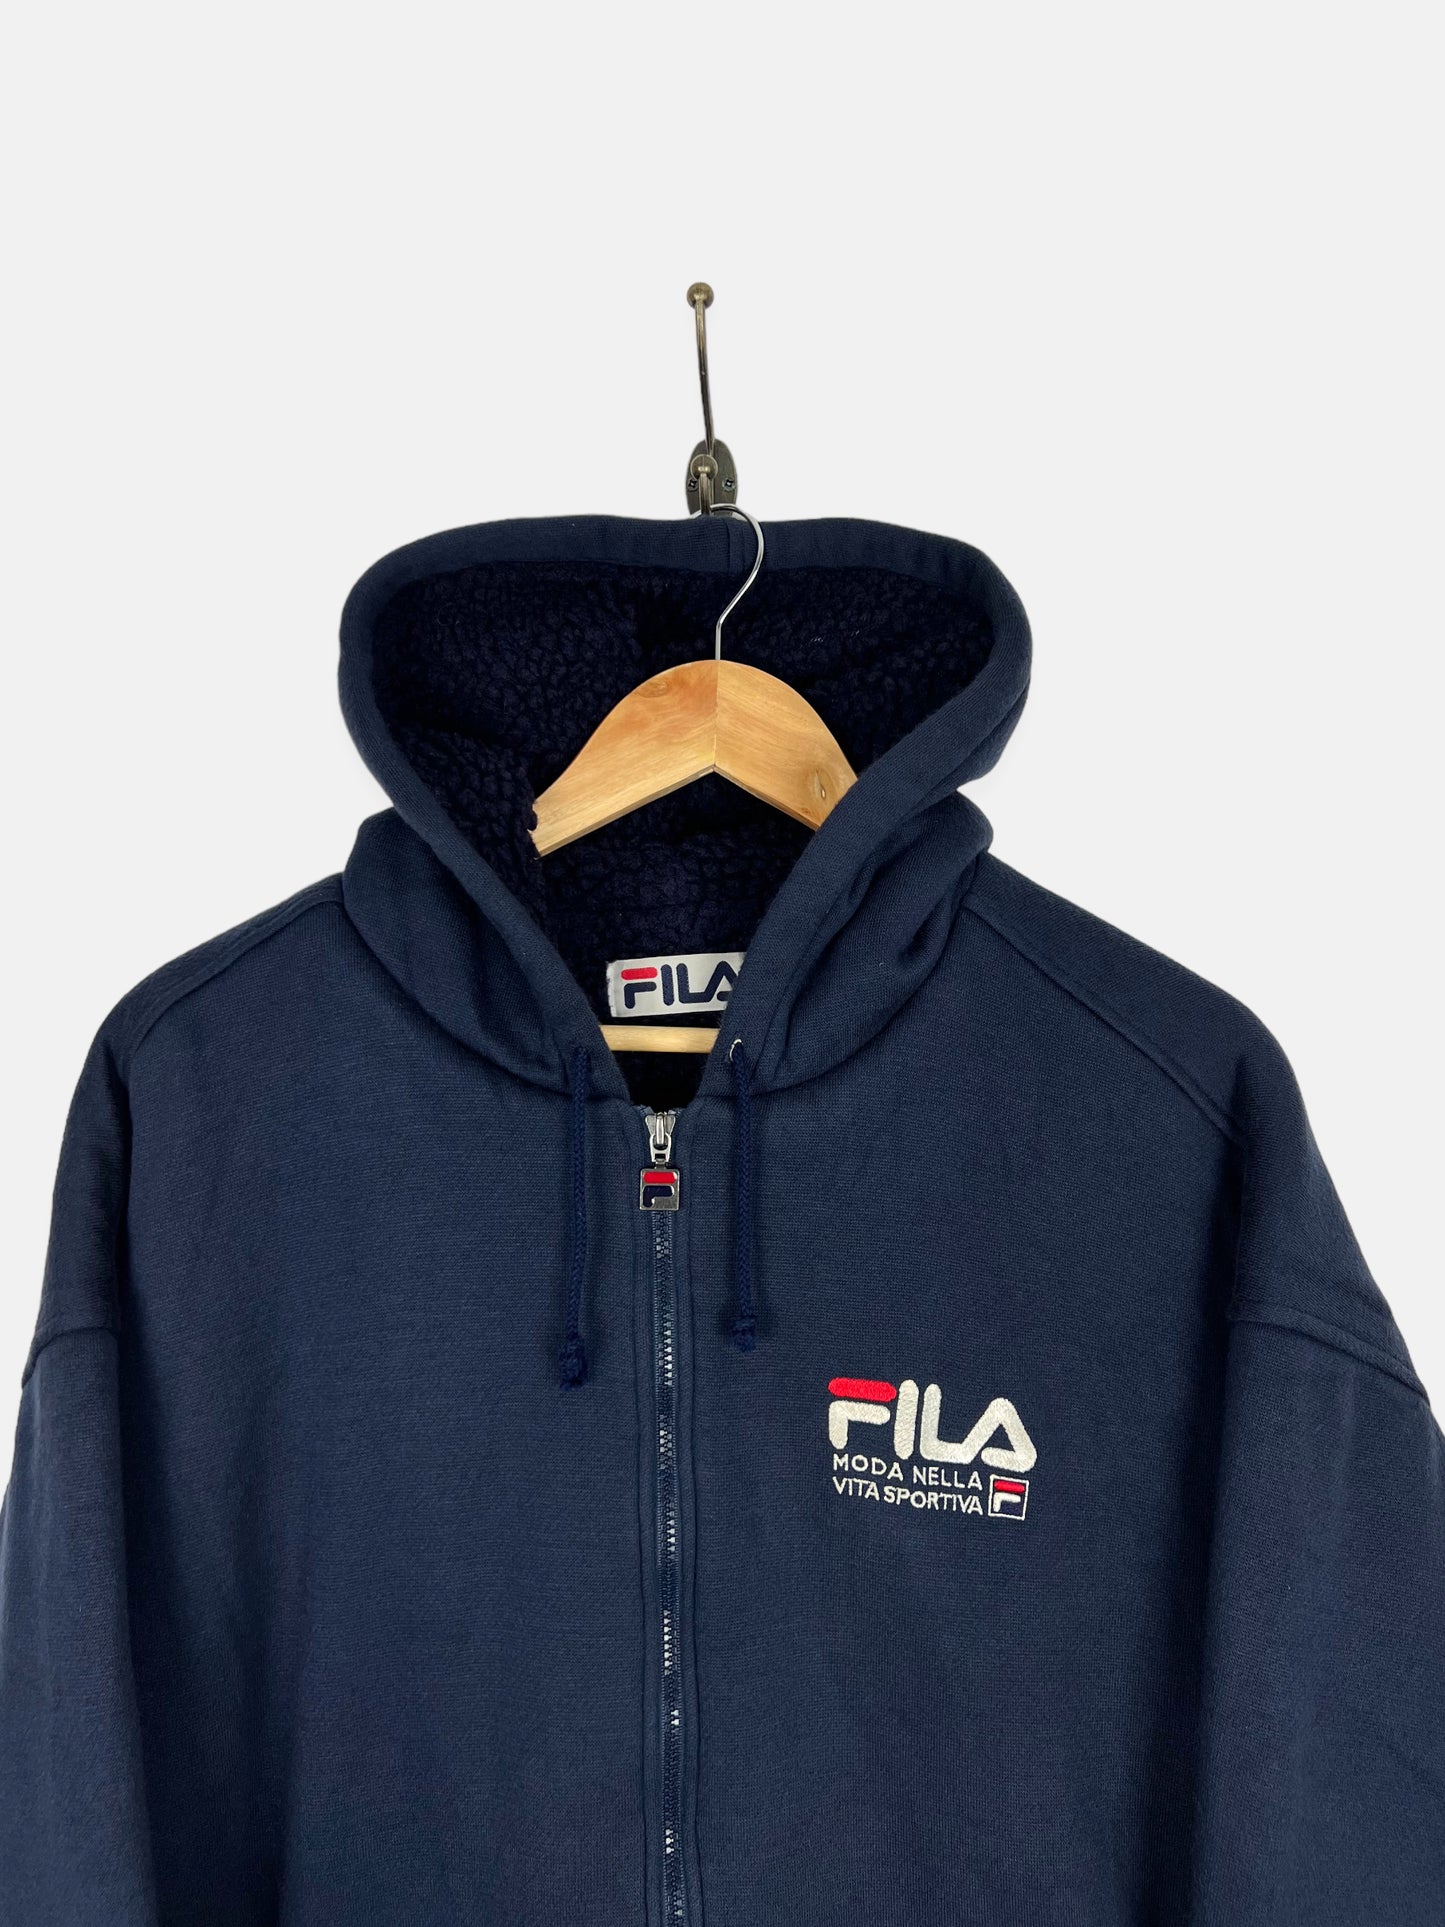 90's Fila Sherpa Lined Embroidered Vintage Zip-Up Hoodie Size L